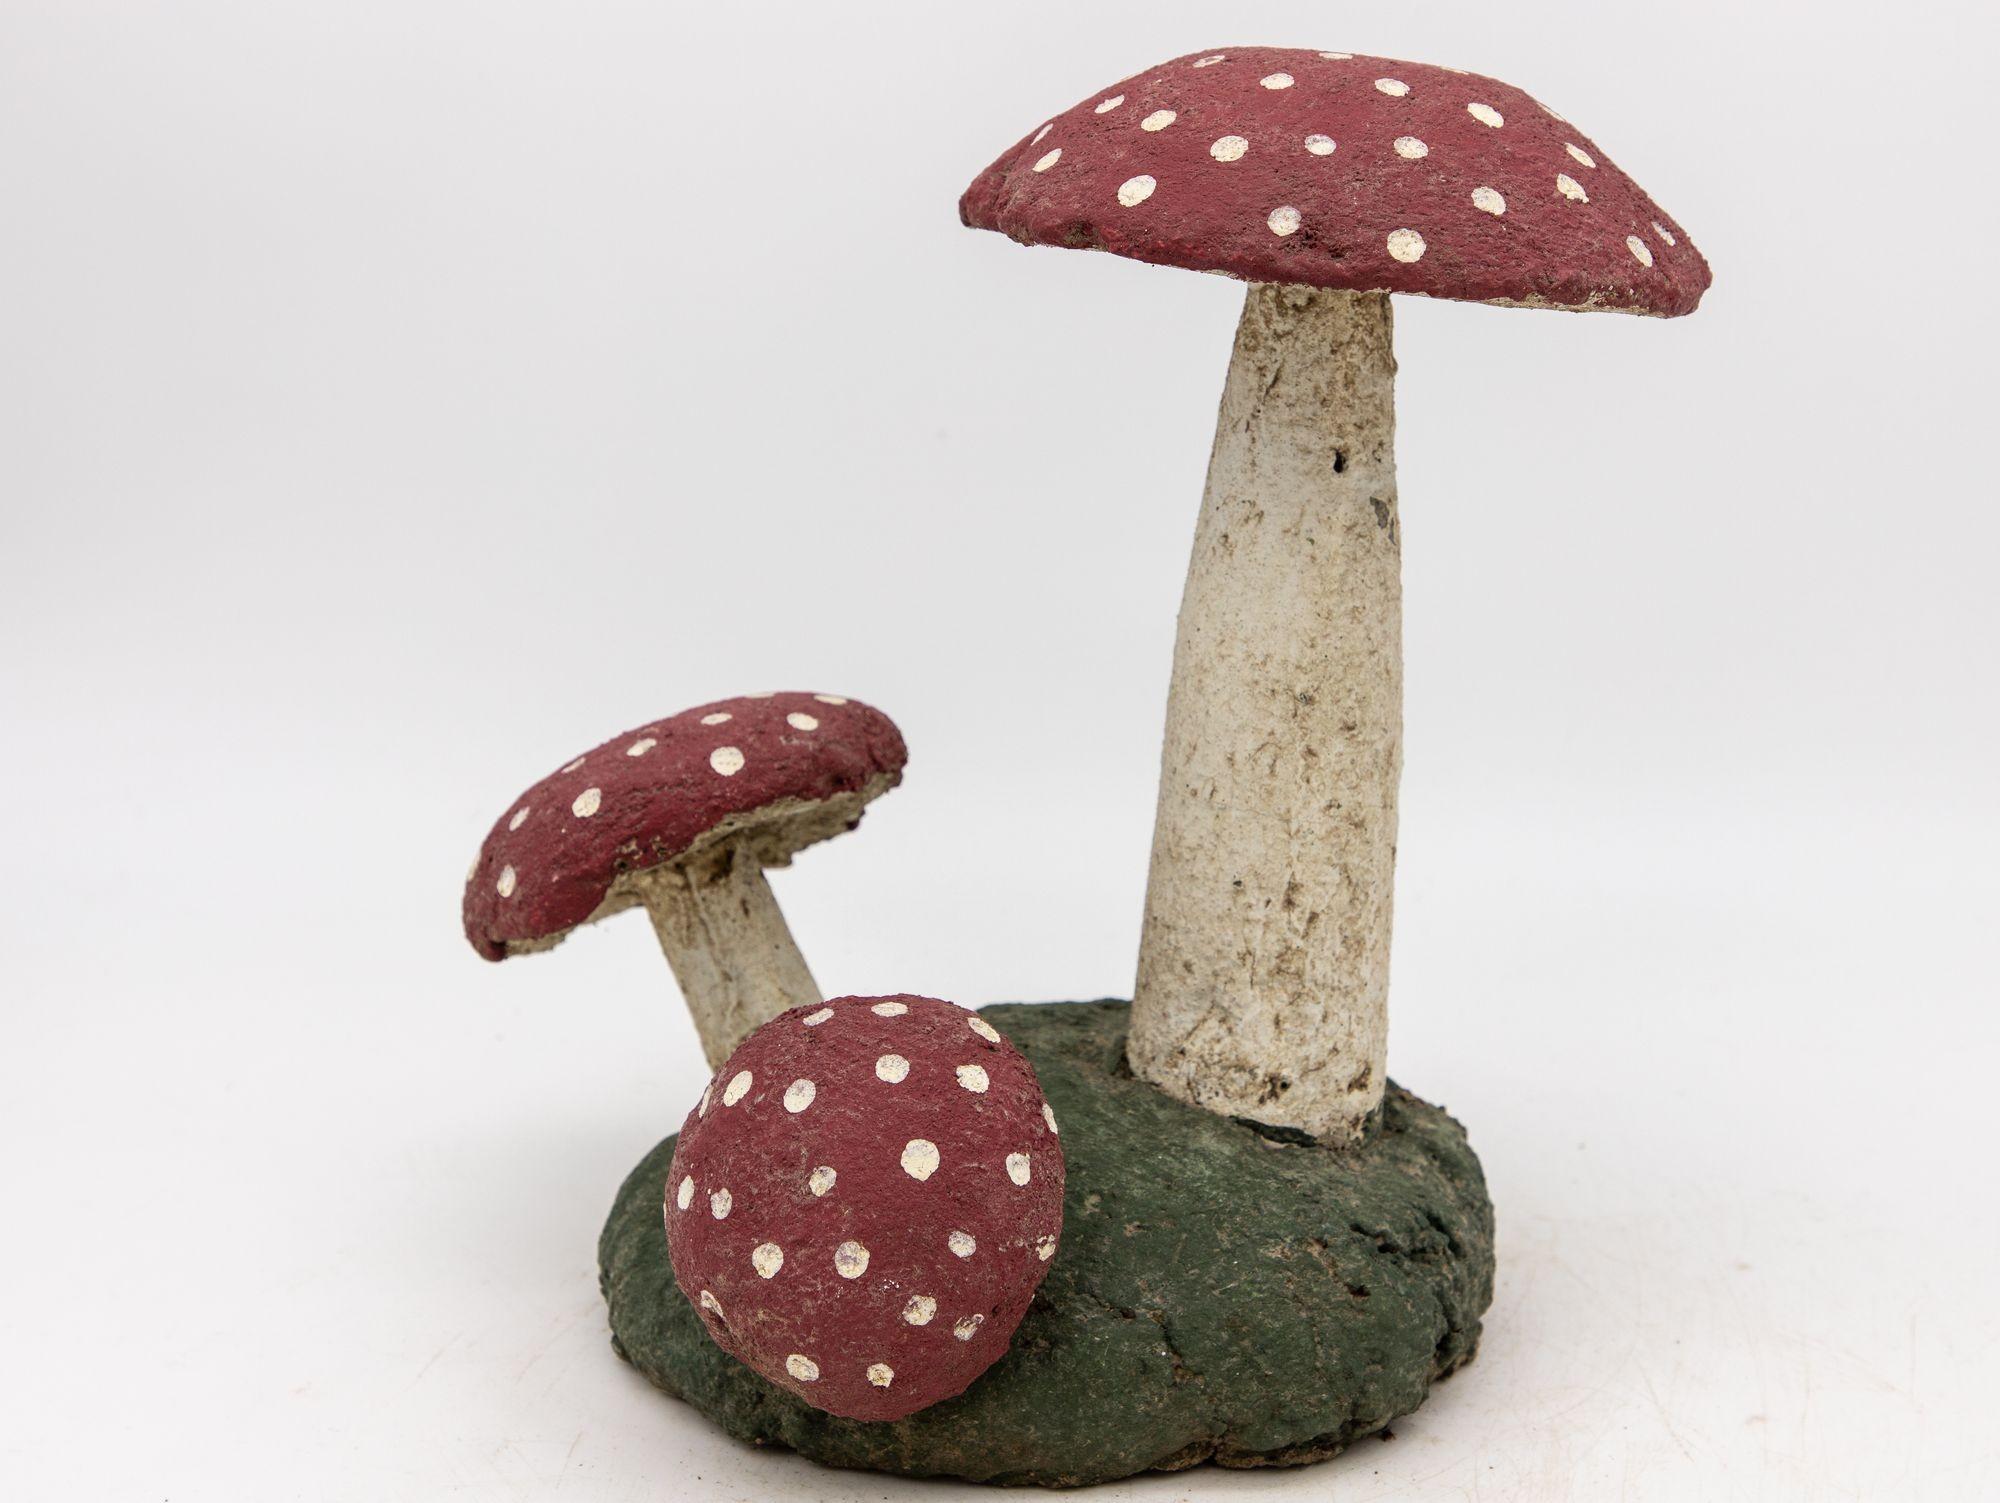 This charming pair of mid-20th century concrete mushroom garden ornaments feature a delightful blend of original red, white, and green paint that adds a vibrant pop of color to any outdoor space. These whimsical garden accents, skillfully crafted